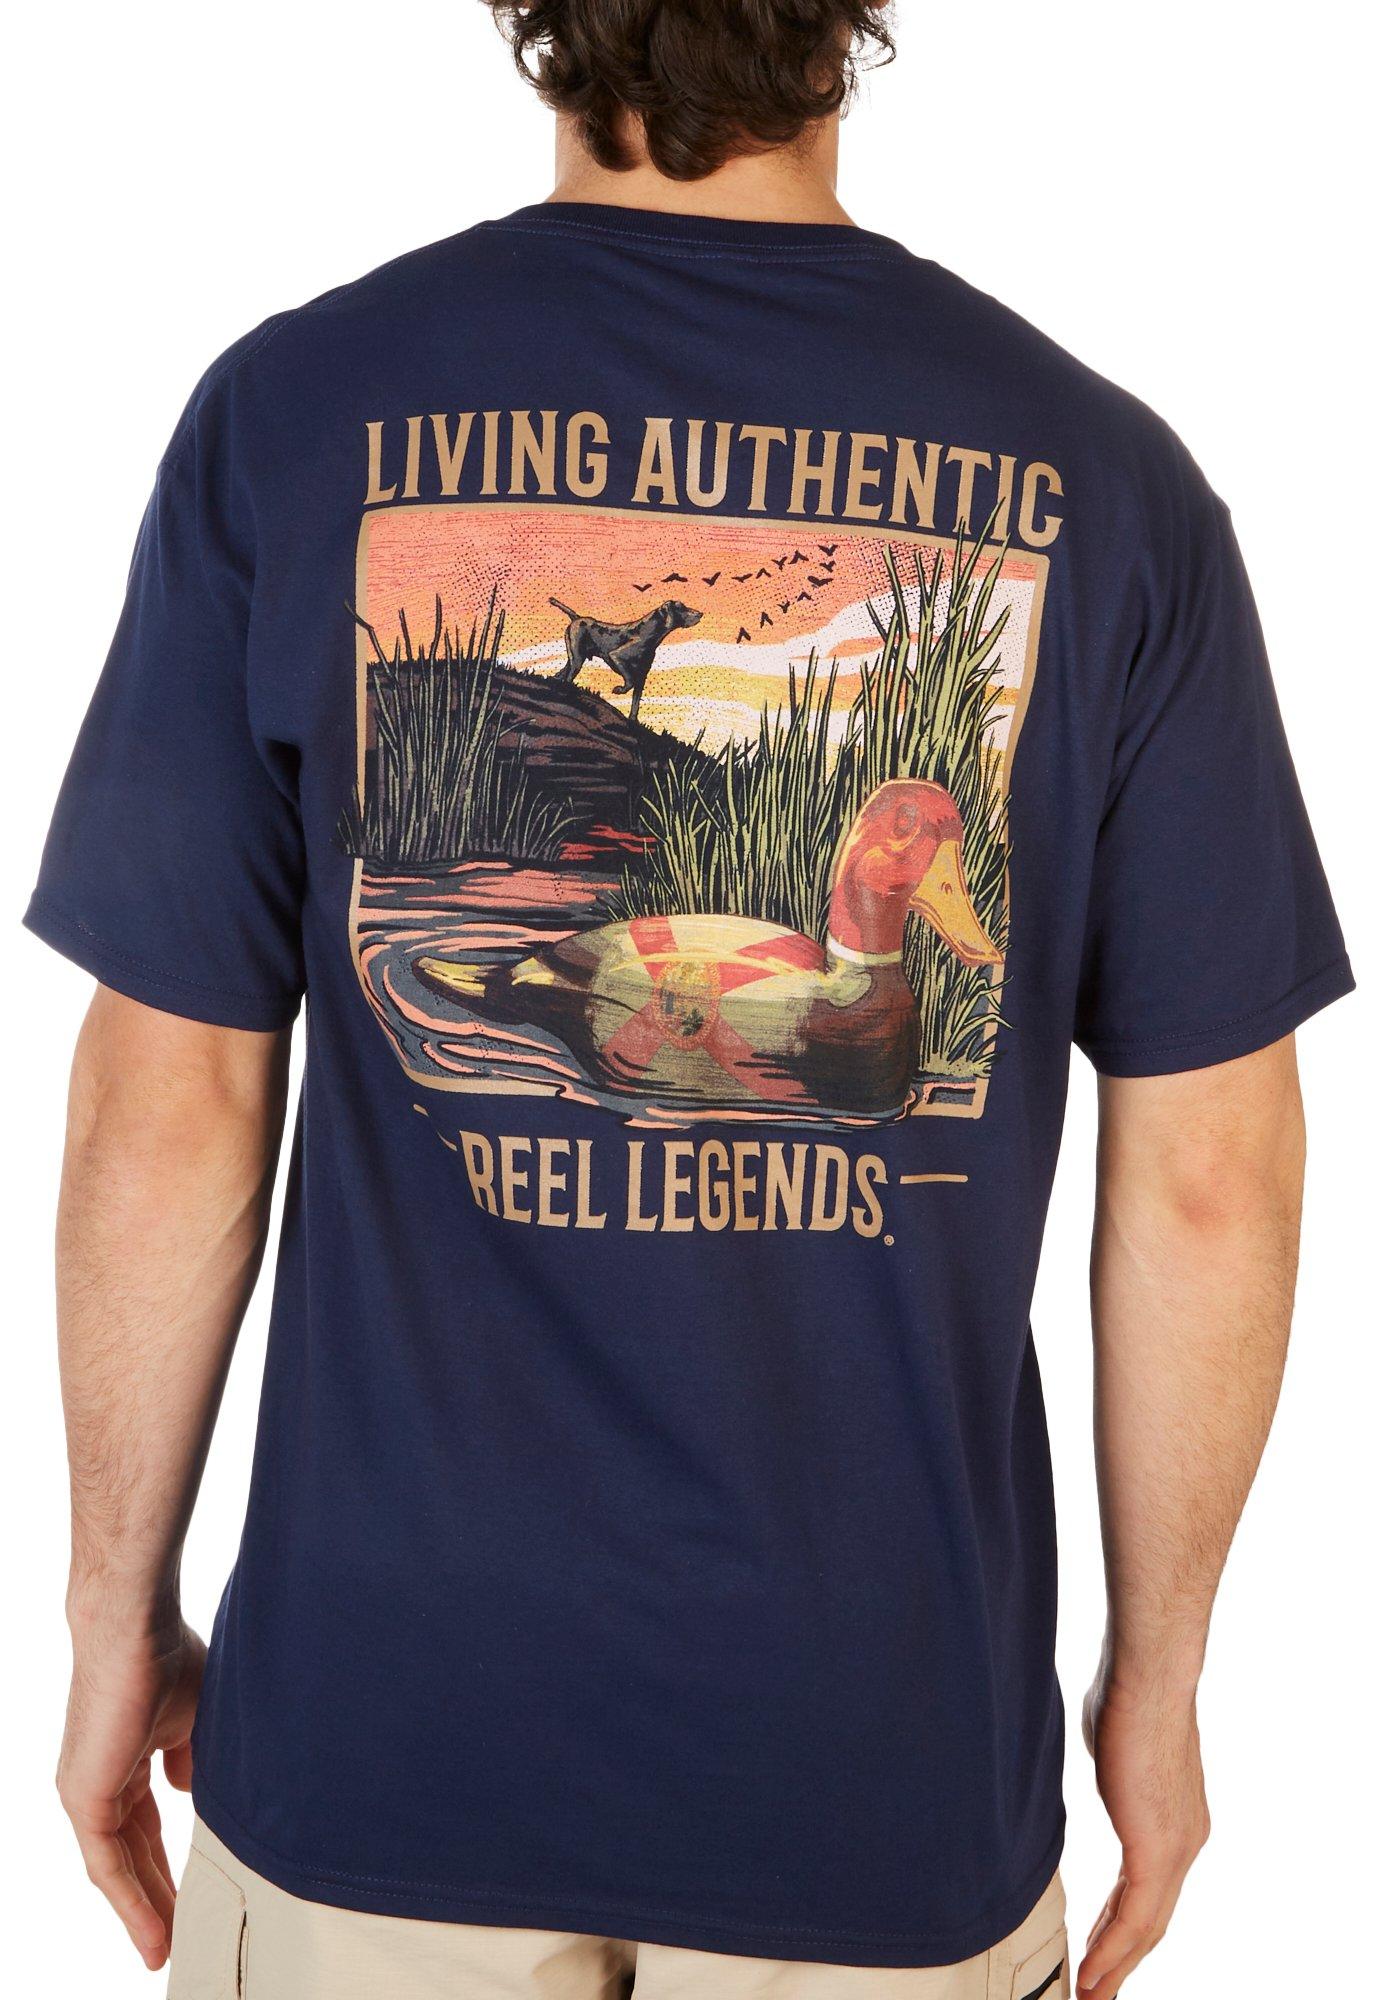 Reel Legends Boys Size M Tops, Shirts & T-Shirts for Boys for sale